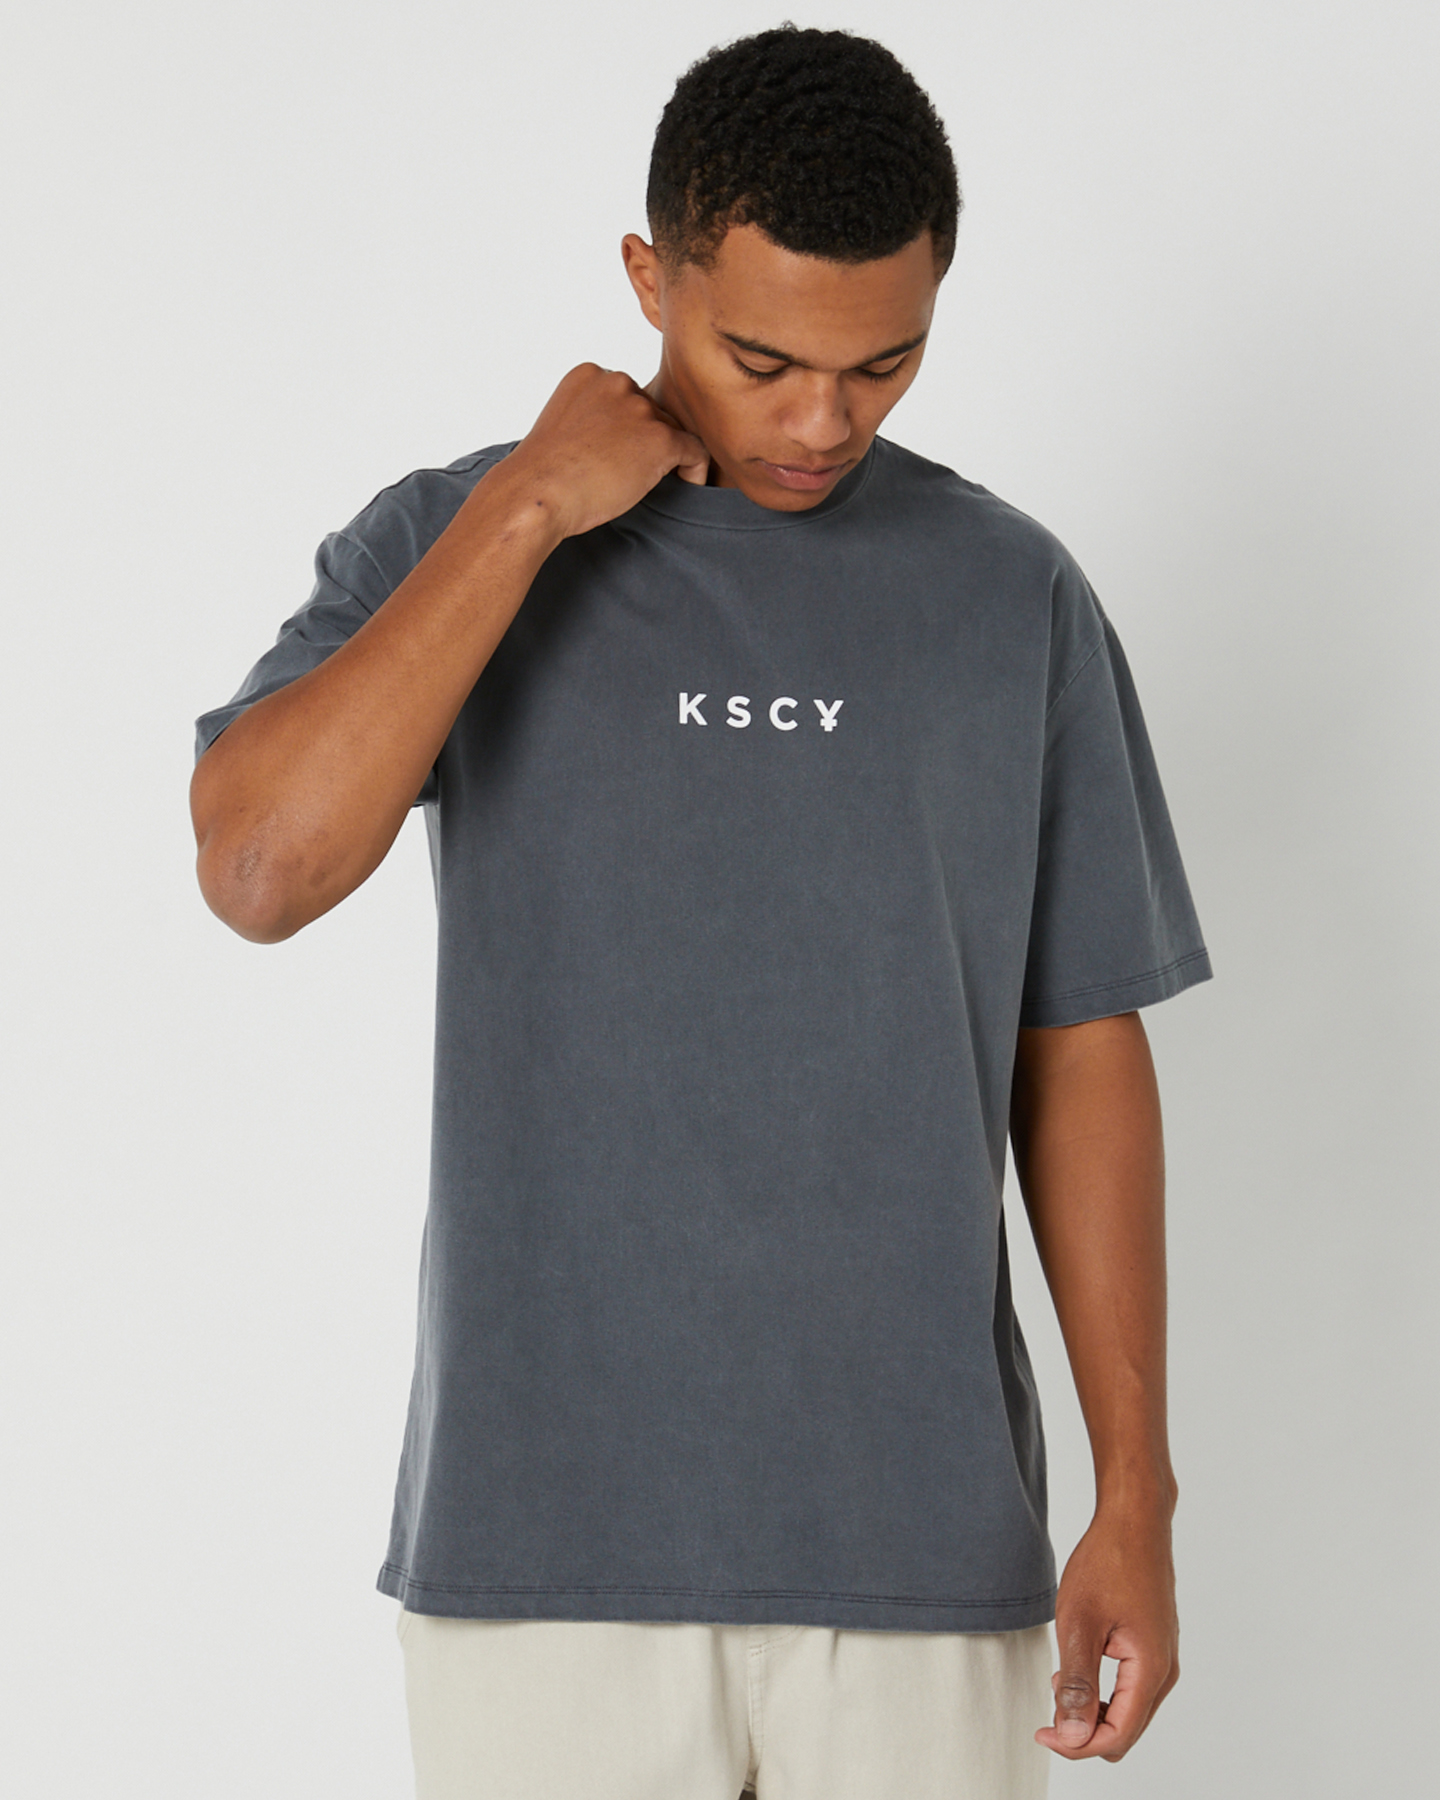 Kiss Chacey Chronicle Heavy Box Fit Tee - Castlerock | SurfStitch